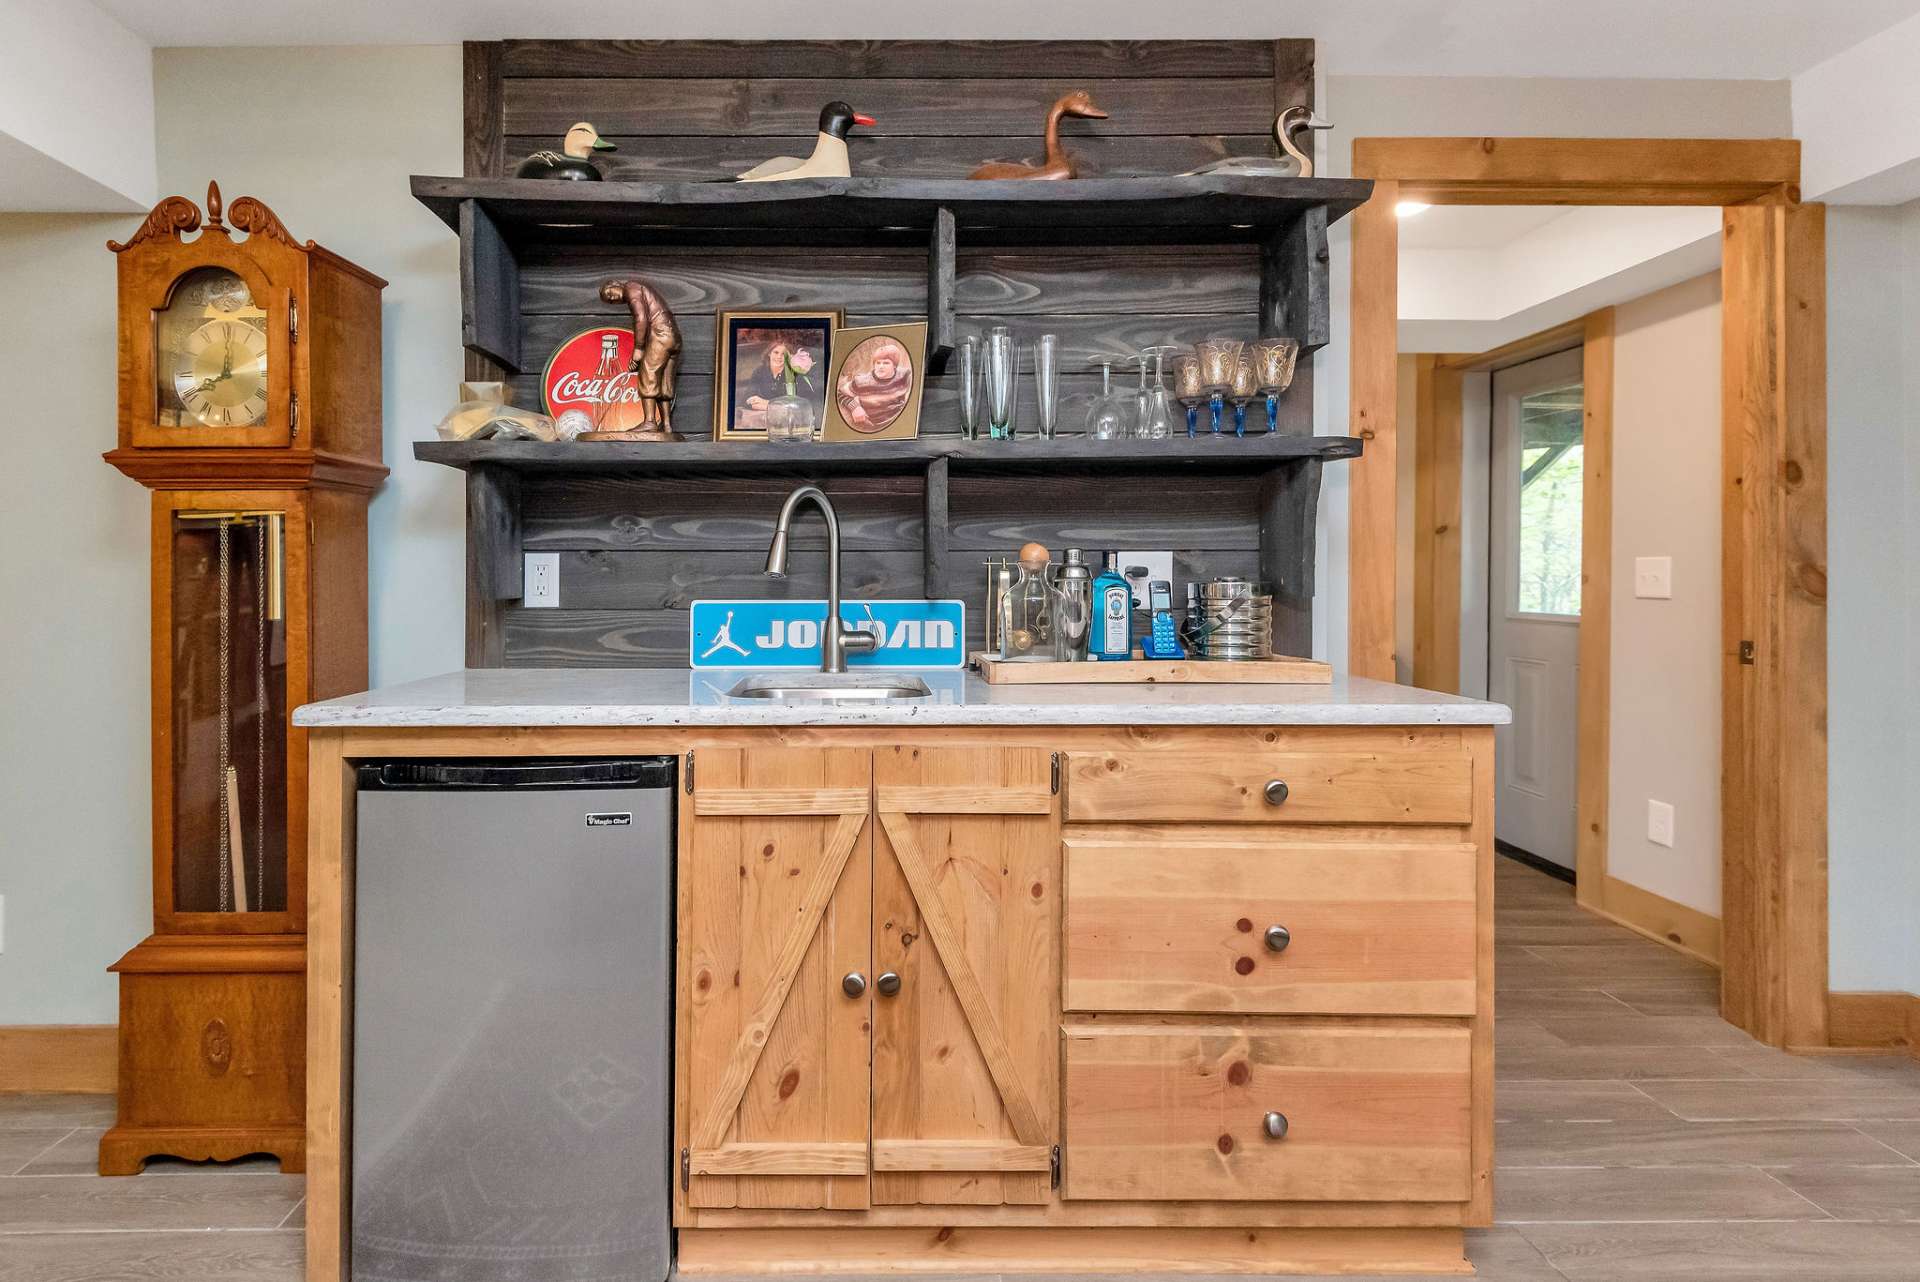 No need to climb the stairs with your convenient wet bar with built-in mini fridge.